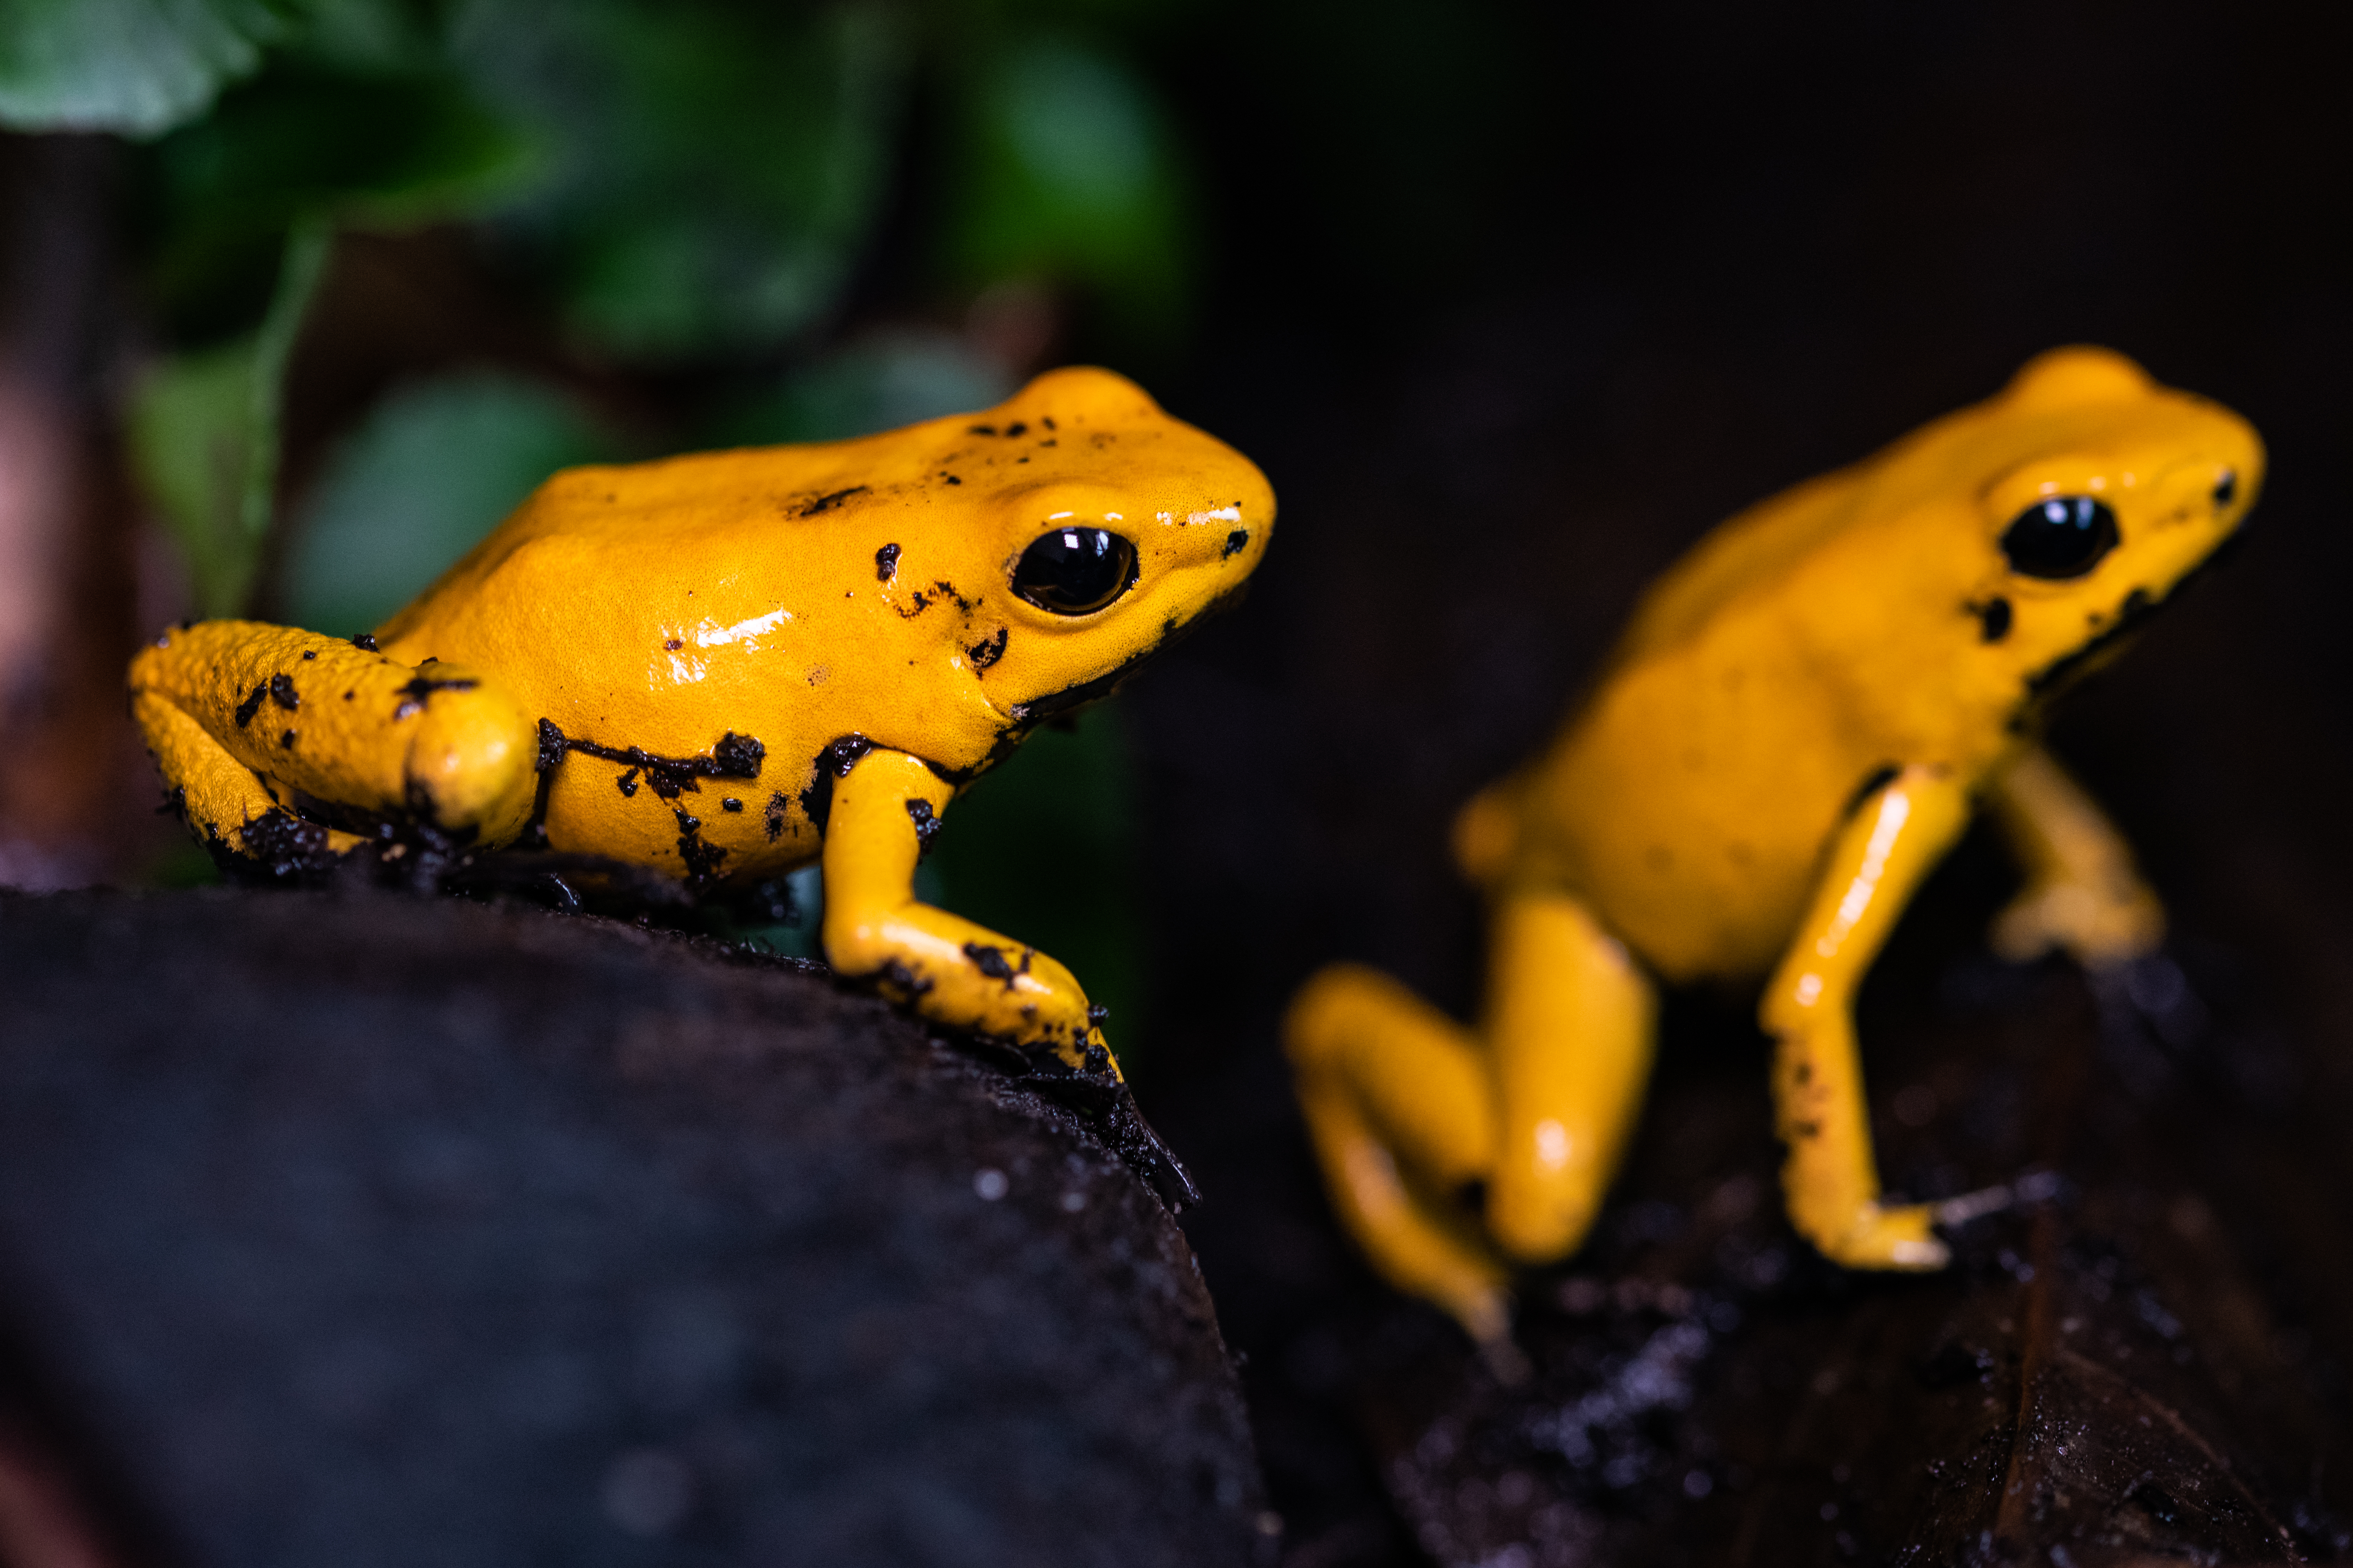 The bright yellow color of the golden poison frogs warns of their extremely potent venom. | Thorsten Spoerlein/Shutterstock.com